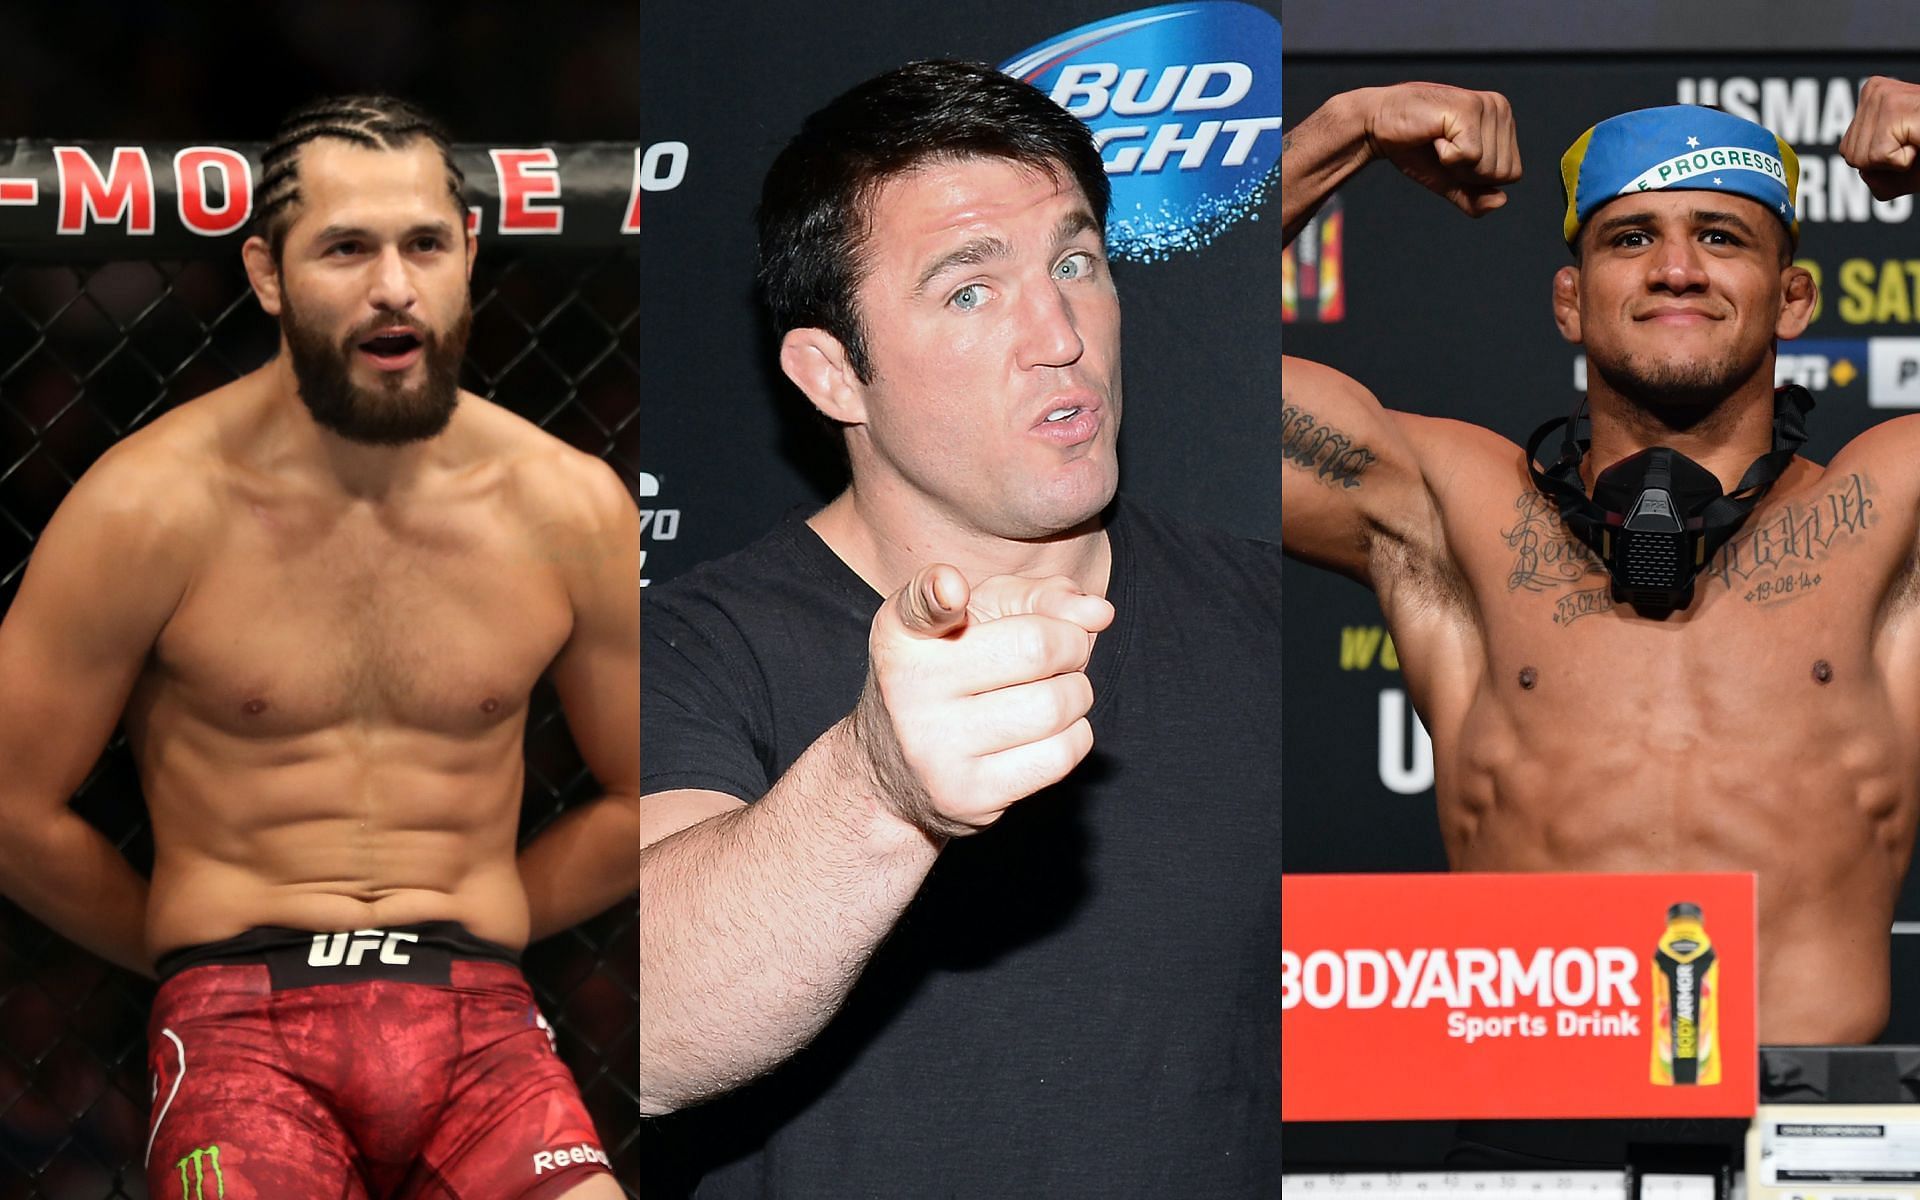 From the left- Jorge Masvidal, Chael Sonnen and Gilbert Burns [Image Courtesy: Getty Images]